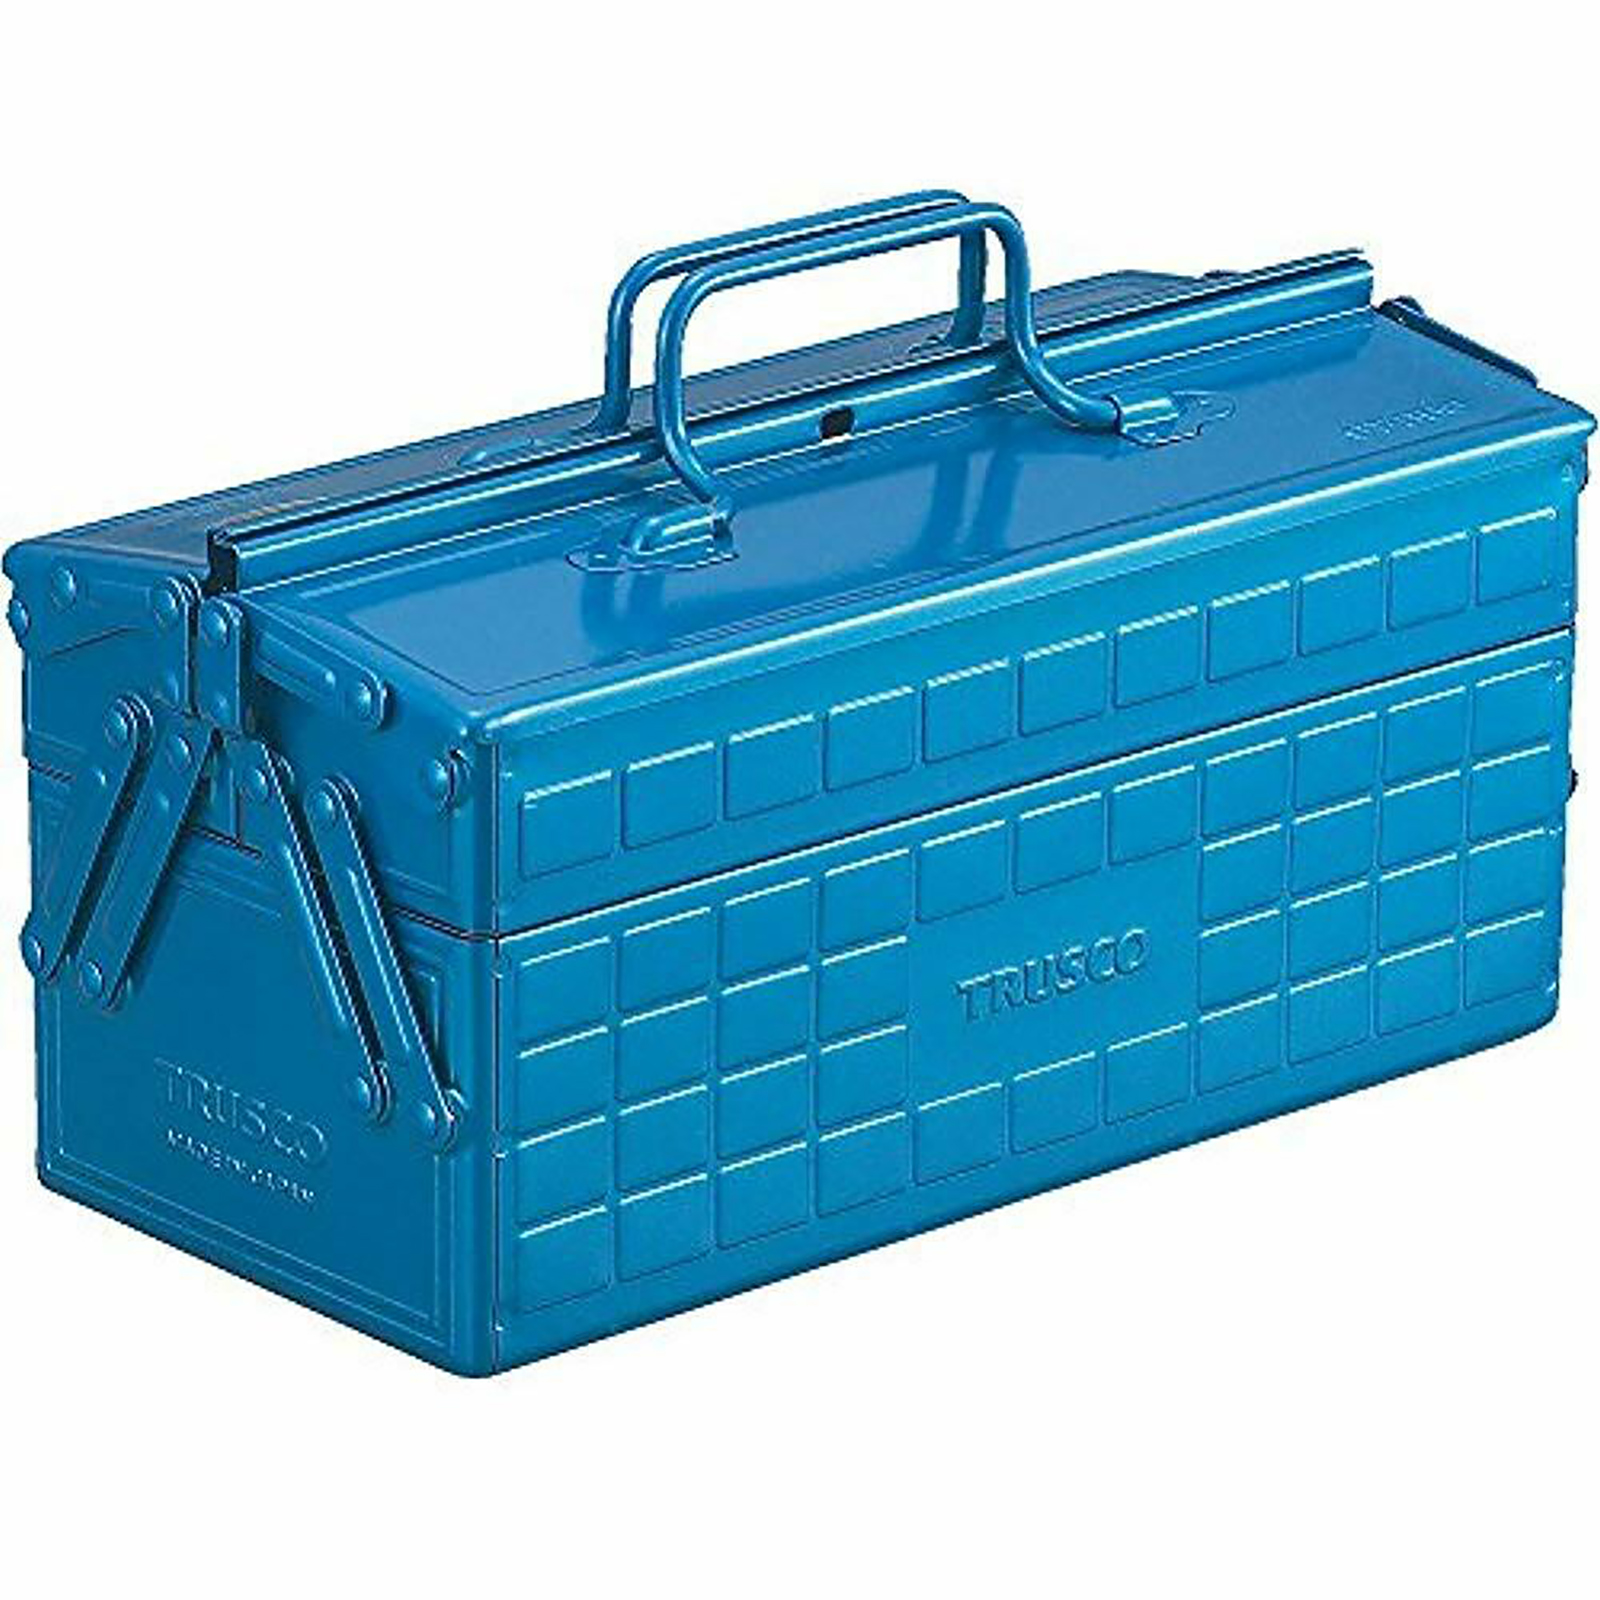 Details about   Trusco 3 Trays Double Layer Steel Tool Box ST-350-B  Blue Durable Storage Case